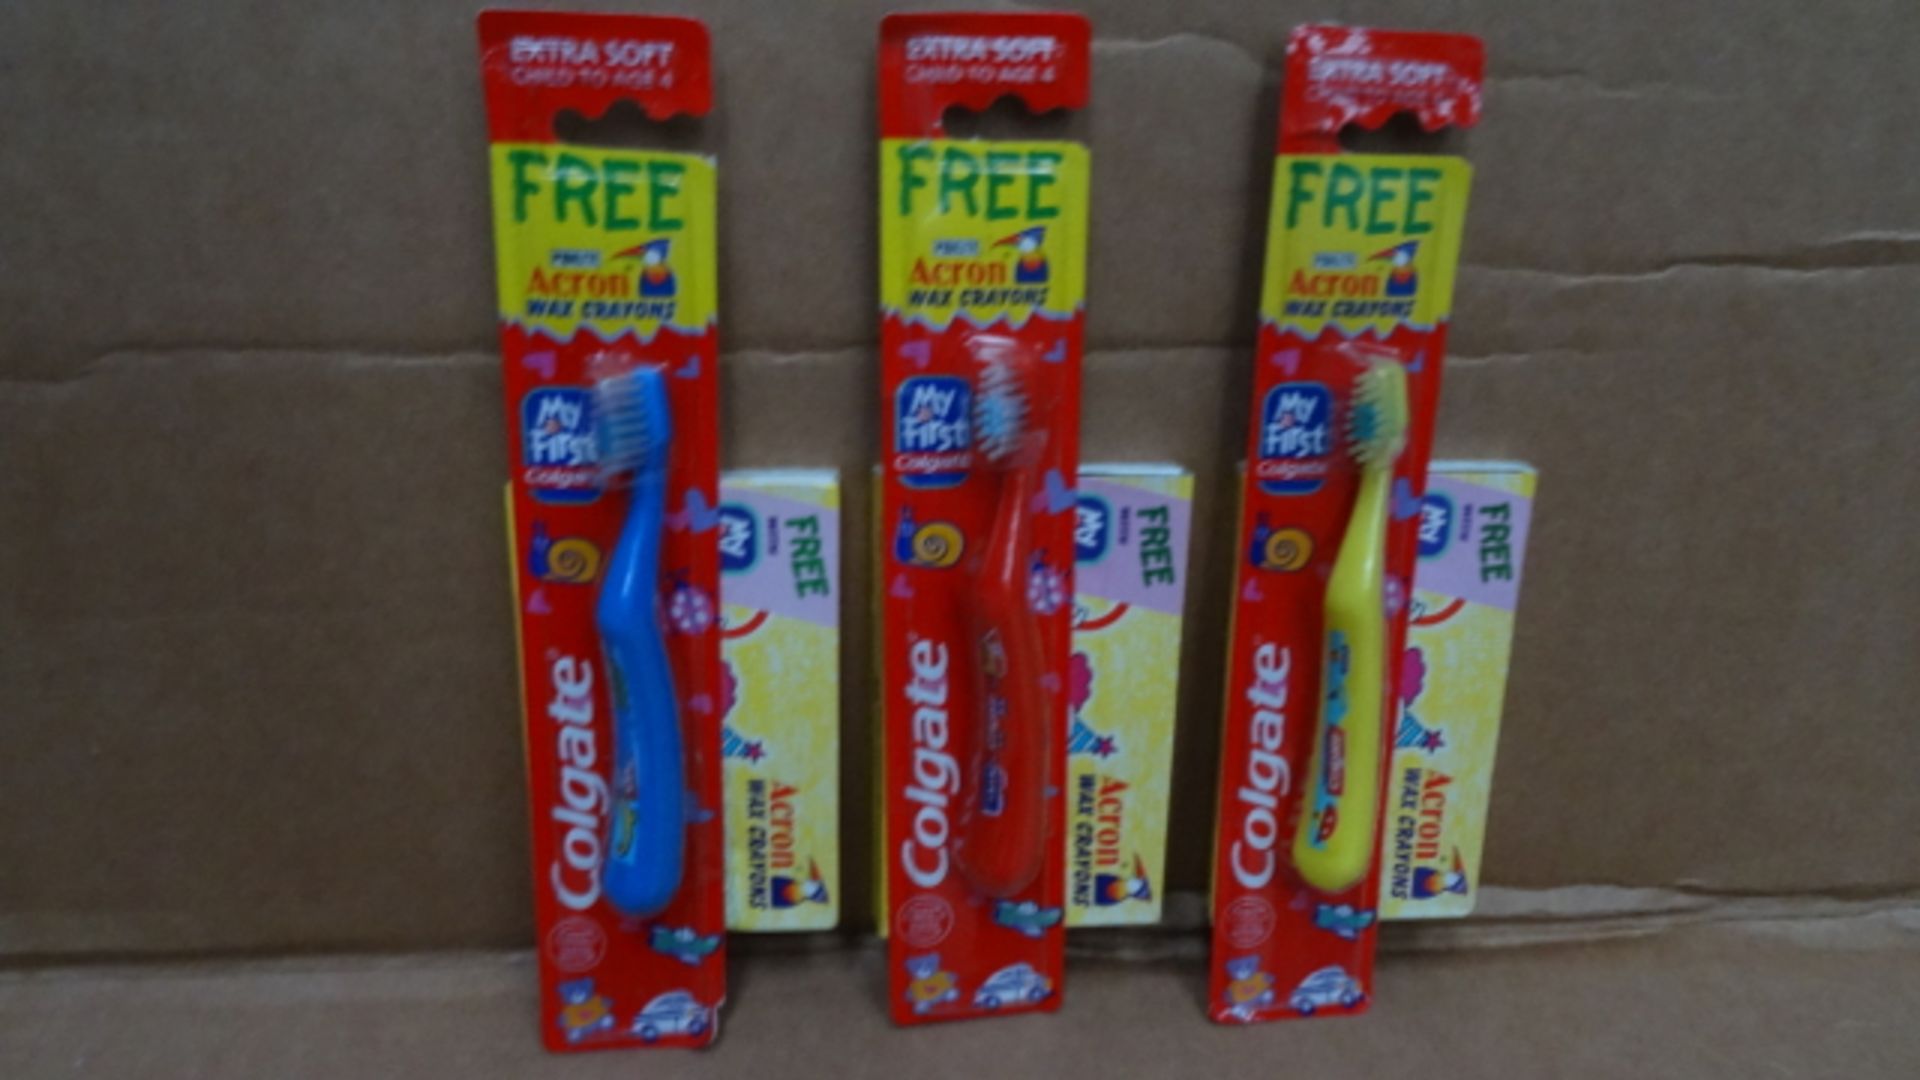 144 x Colgate 'My First ToothBrush' with crayons. Extra soft tooth brush for children aged up to 4